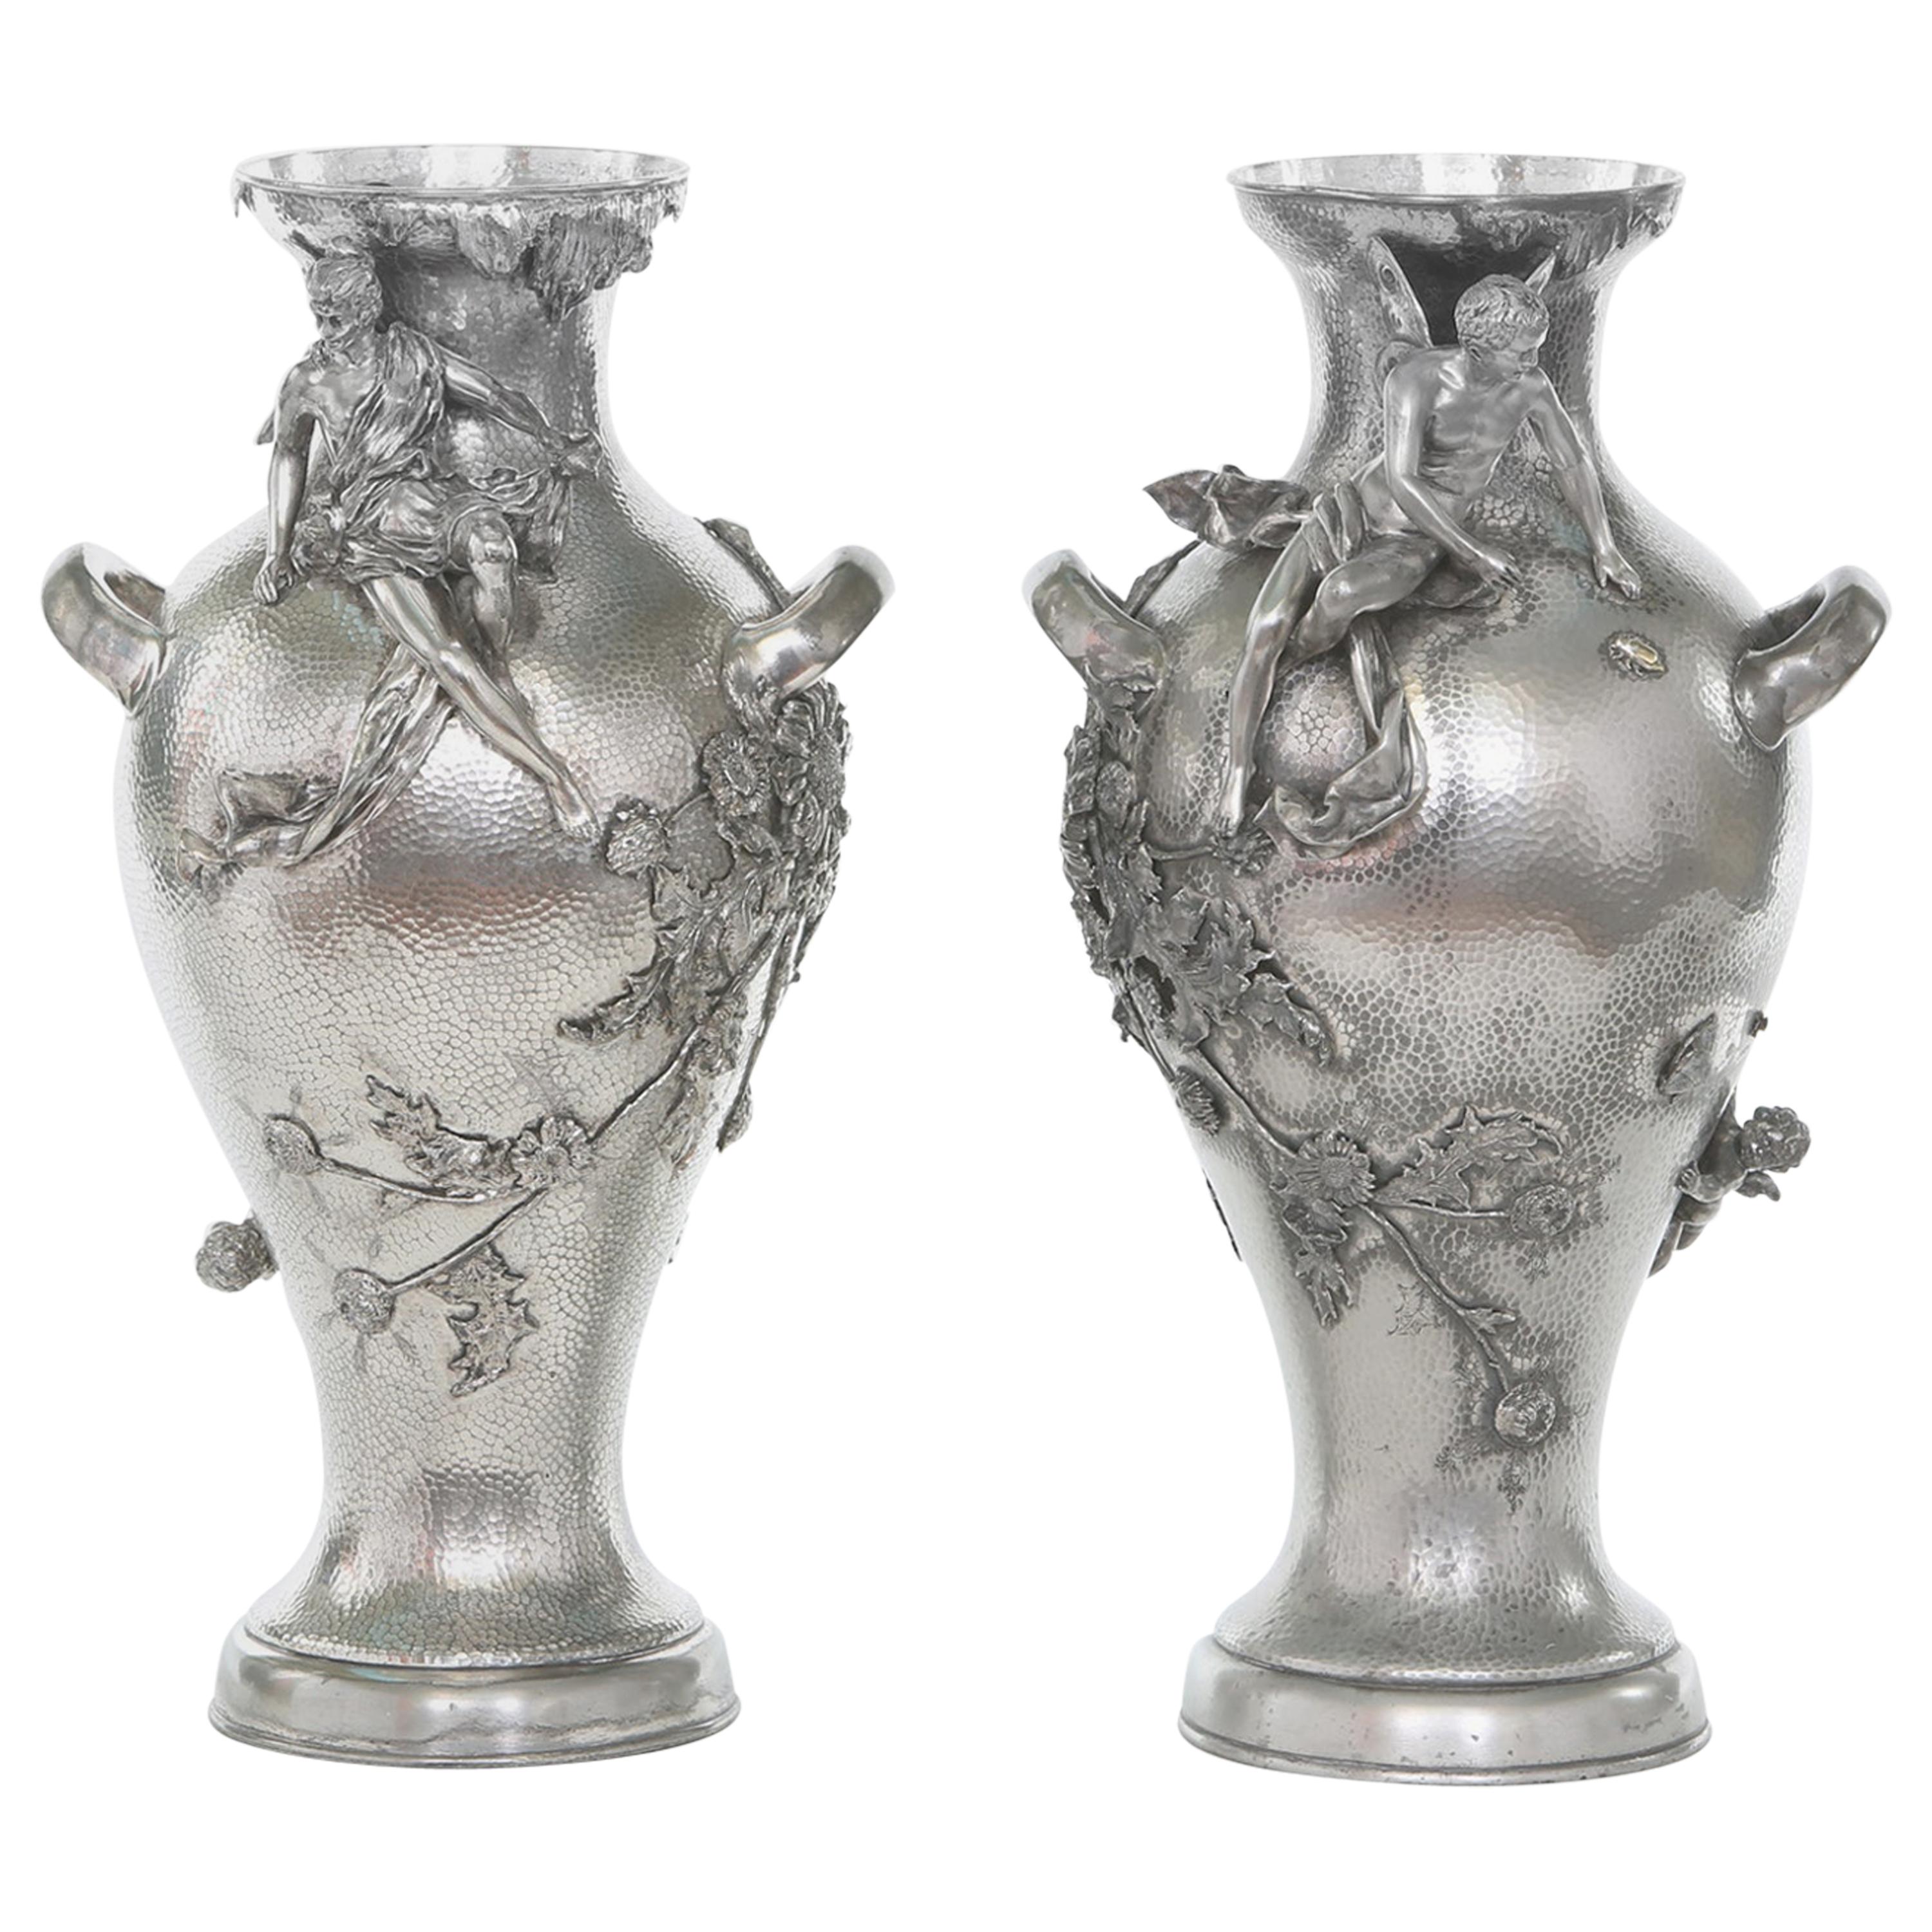 Late 19th Century Silver Plated Pair of Vases / Urns